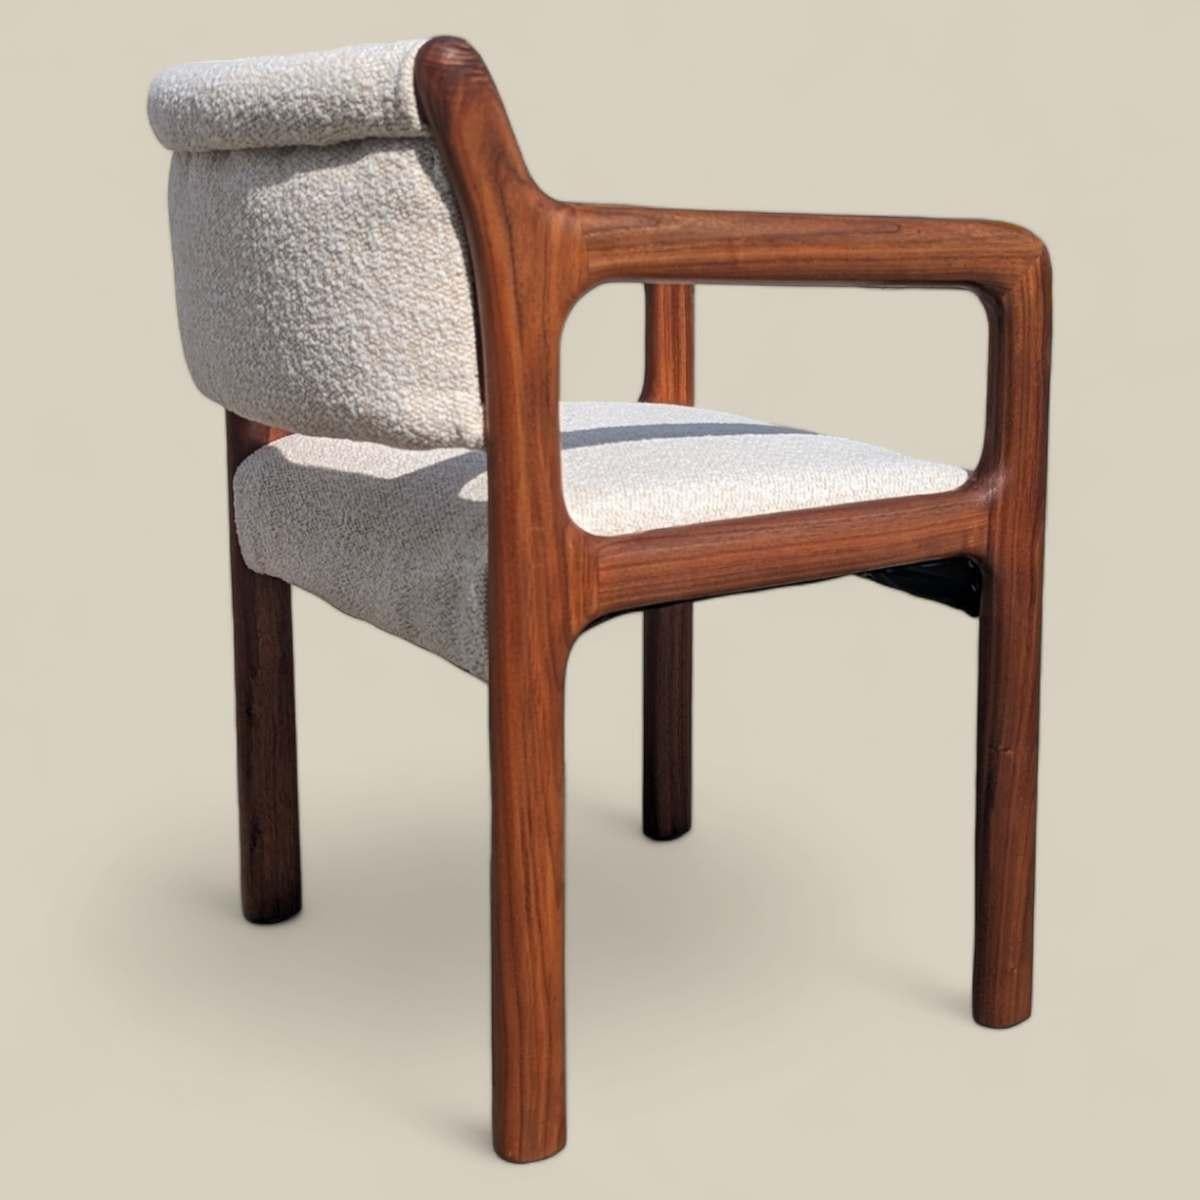 Presenting a stunning pair of Mid-Century Modern armchairs, crafted by the renowned Albert Salman Associates and Salman Fine Furniture Craftsman of California. These elegant chairs showcase the distinctive design elements often associated with the